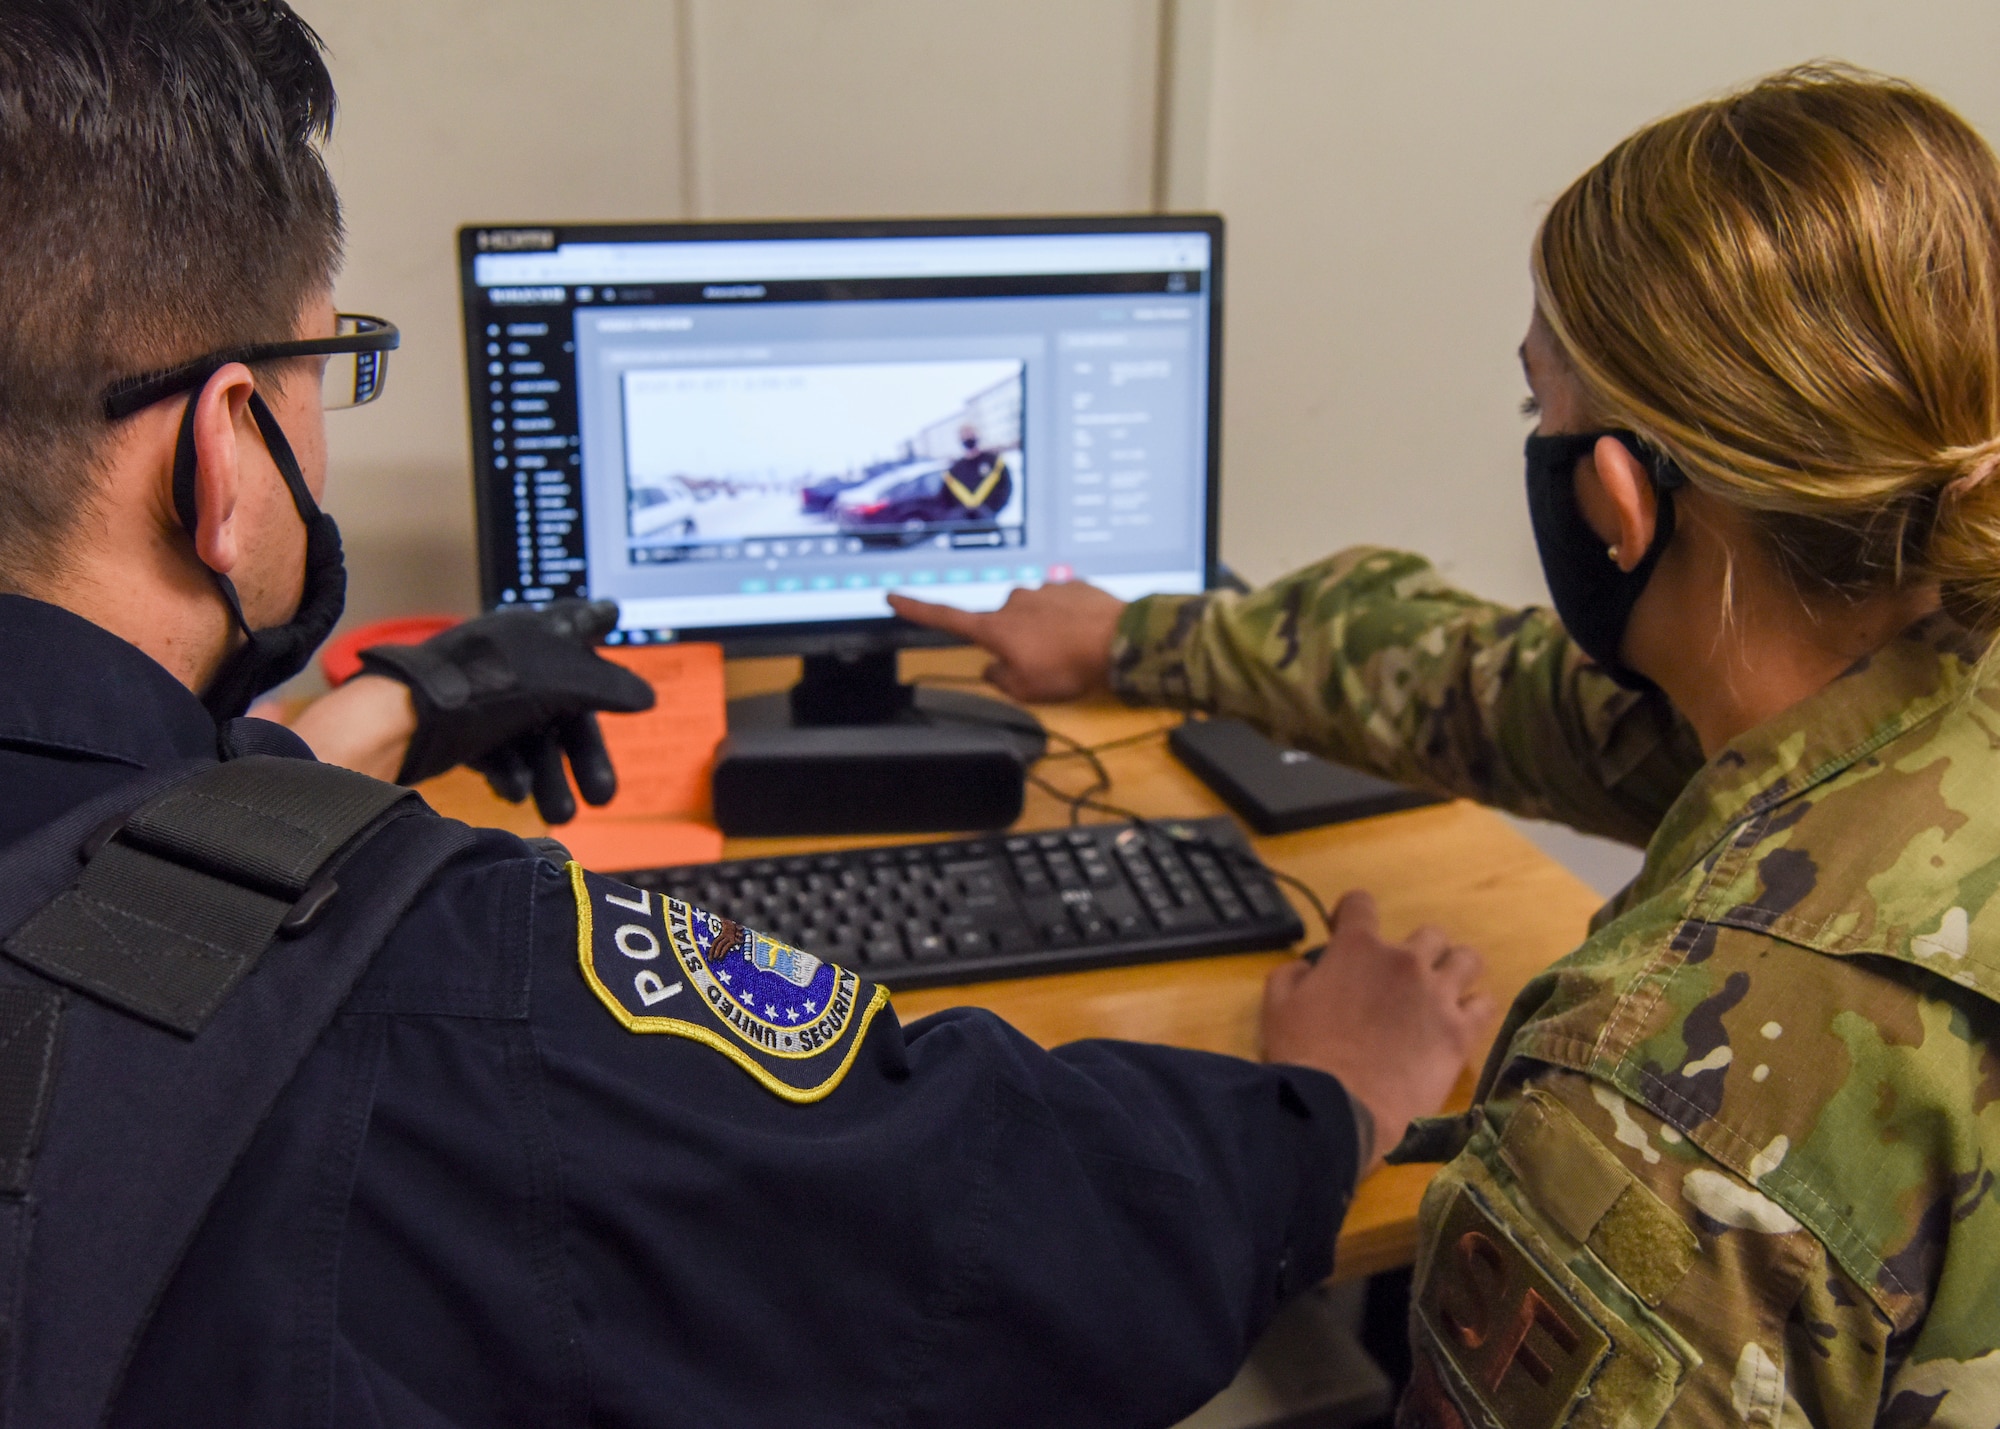 Department of Defense Police Officer Richard Martinez, patrol officer with the 673d Security Forces Squadron and U.S. Air Force Senior Airman Danielle Chose, a 673 SFS operations support/police services operator, review footage from a new body camera after an incident Jan. 8, 2021, at Joint Base Elmendorf-Richardson, Alaska. The 673d SFS has begun integrating 60 new, high-tech body cameras into daily operations after the adaptable technology reached a point of not only being a reliable safety and training instrument, but a multifunctional accountability tool serving all. (U.S. Air Force photo by Senior Airman Crystal A. Jenkins)